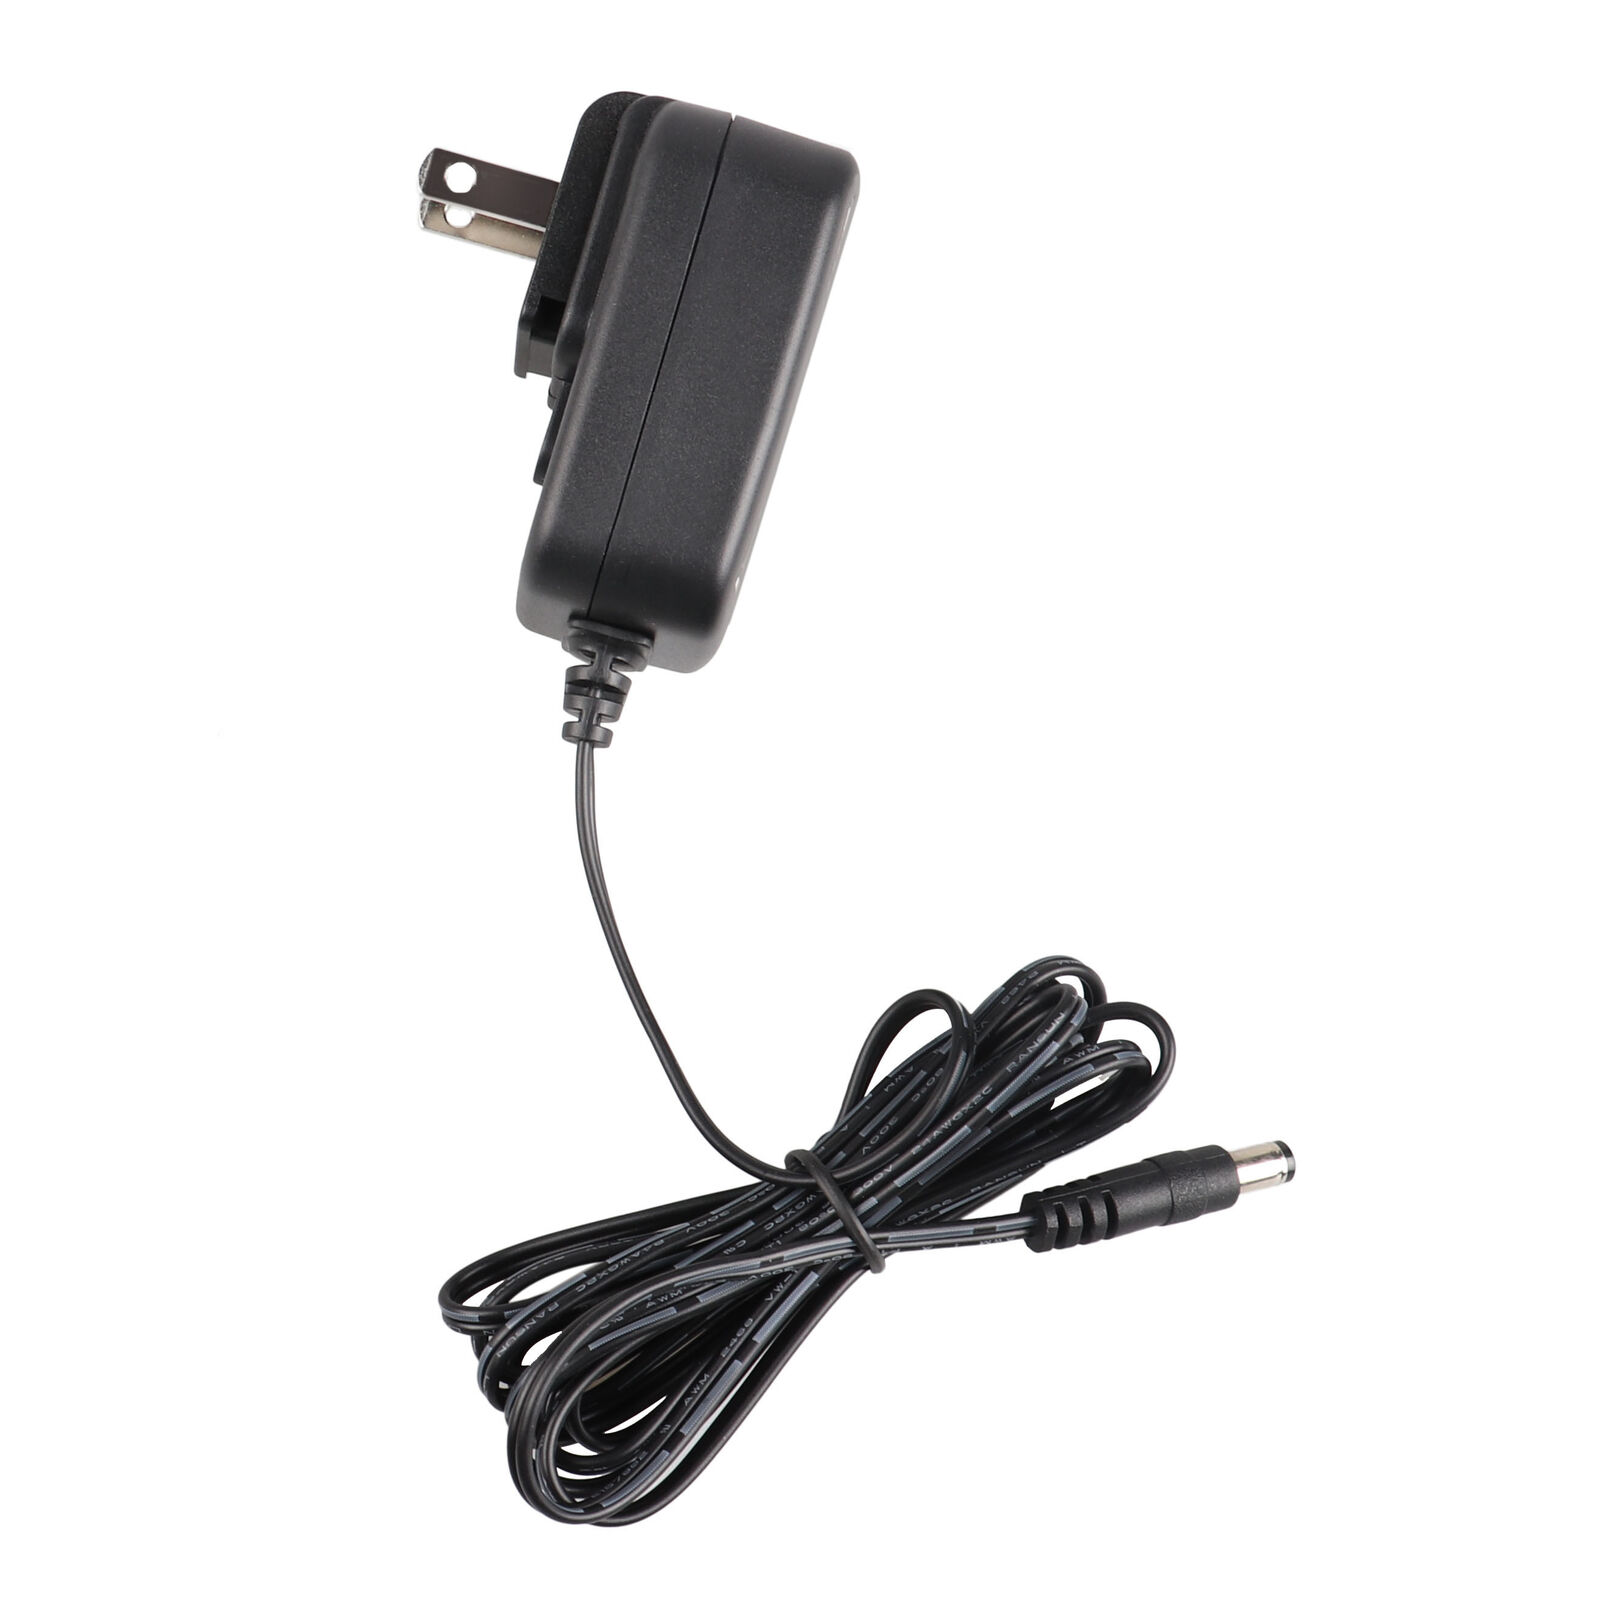 Power Cord for Schwinn Bike Charger Exercise Elliptical Recumbent Upright Trainer A10 A20 120 122 125 130 150 170 213 22